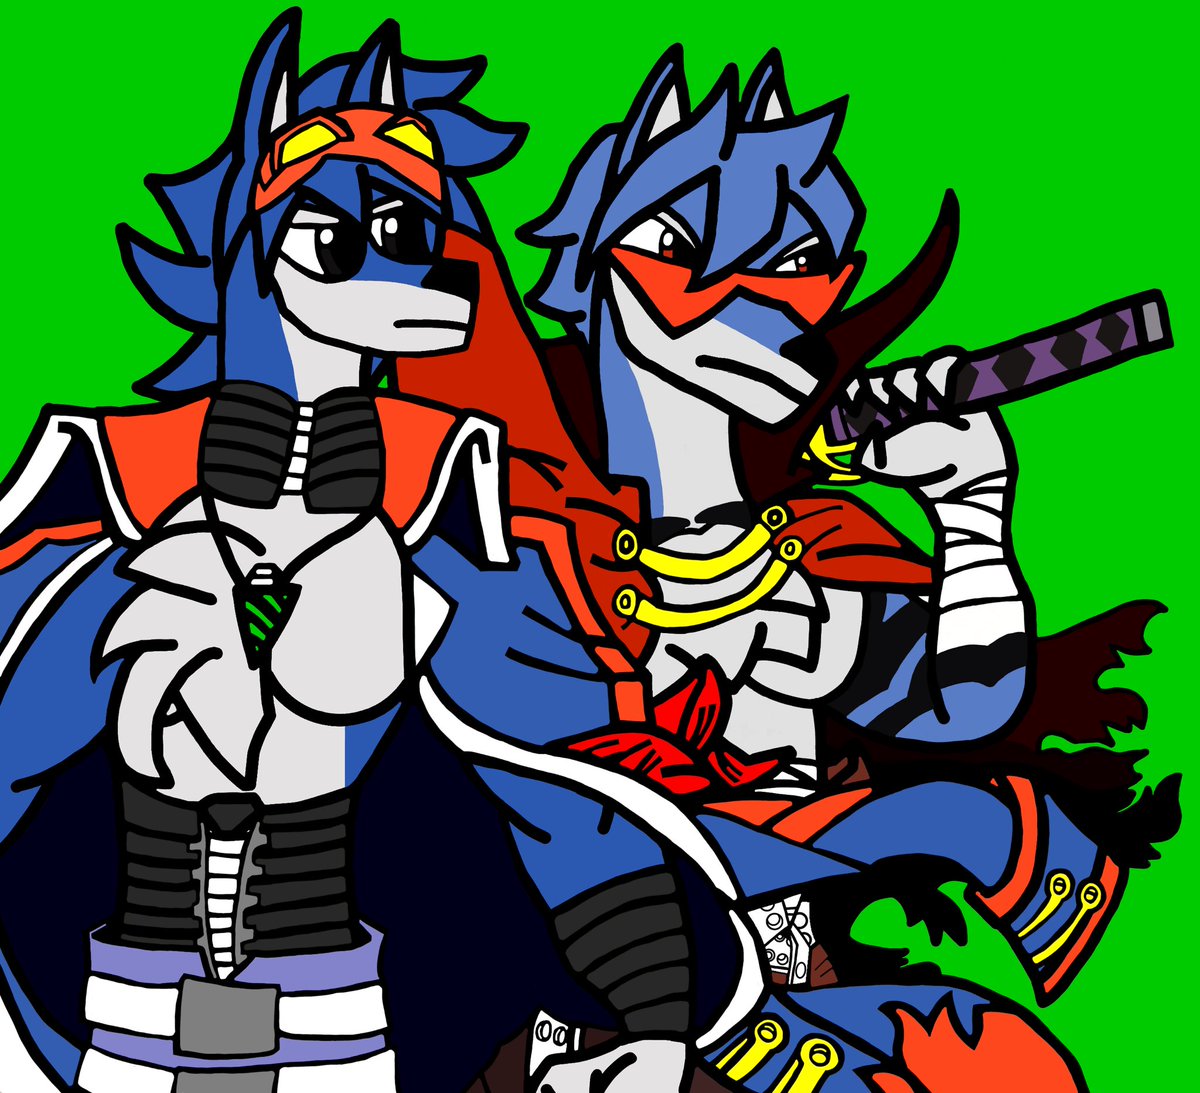 Commission from Fortkavanagh. He ask me to draw Simon and Kamina as Hellhounds. (Simon and Kamina is from a anime show called, Gurren Lagann.)